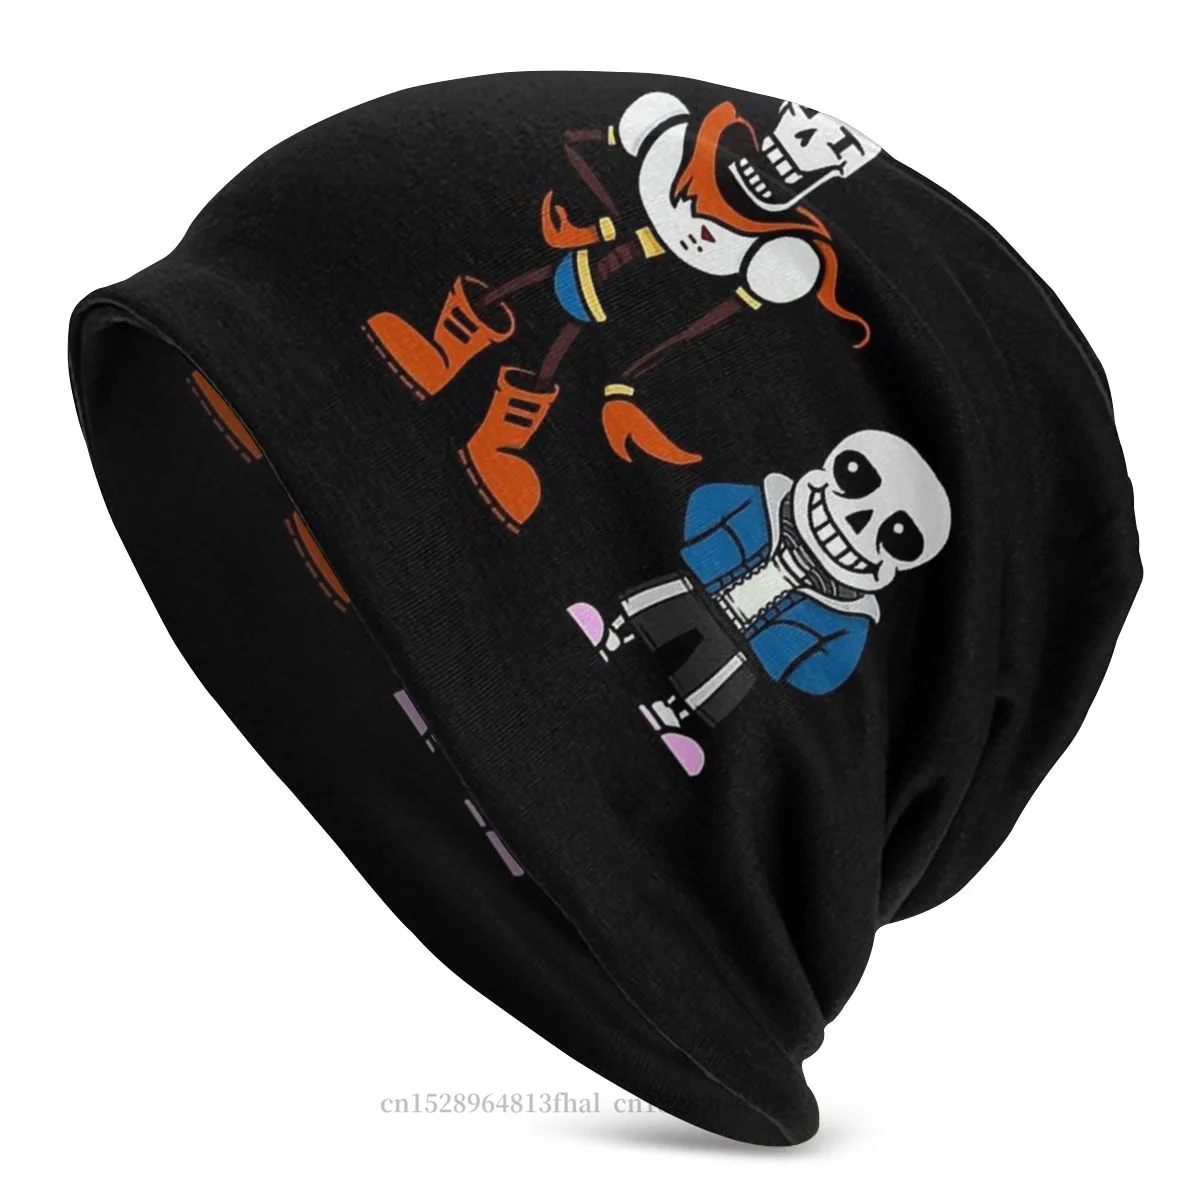 

Knitted Hat Best Seller Papyrus And Sans Fashion Beanie Caps Undertale Role Playing Video Game Skullies Beanies Soft Bonnet Hats